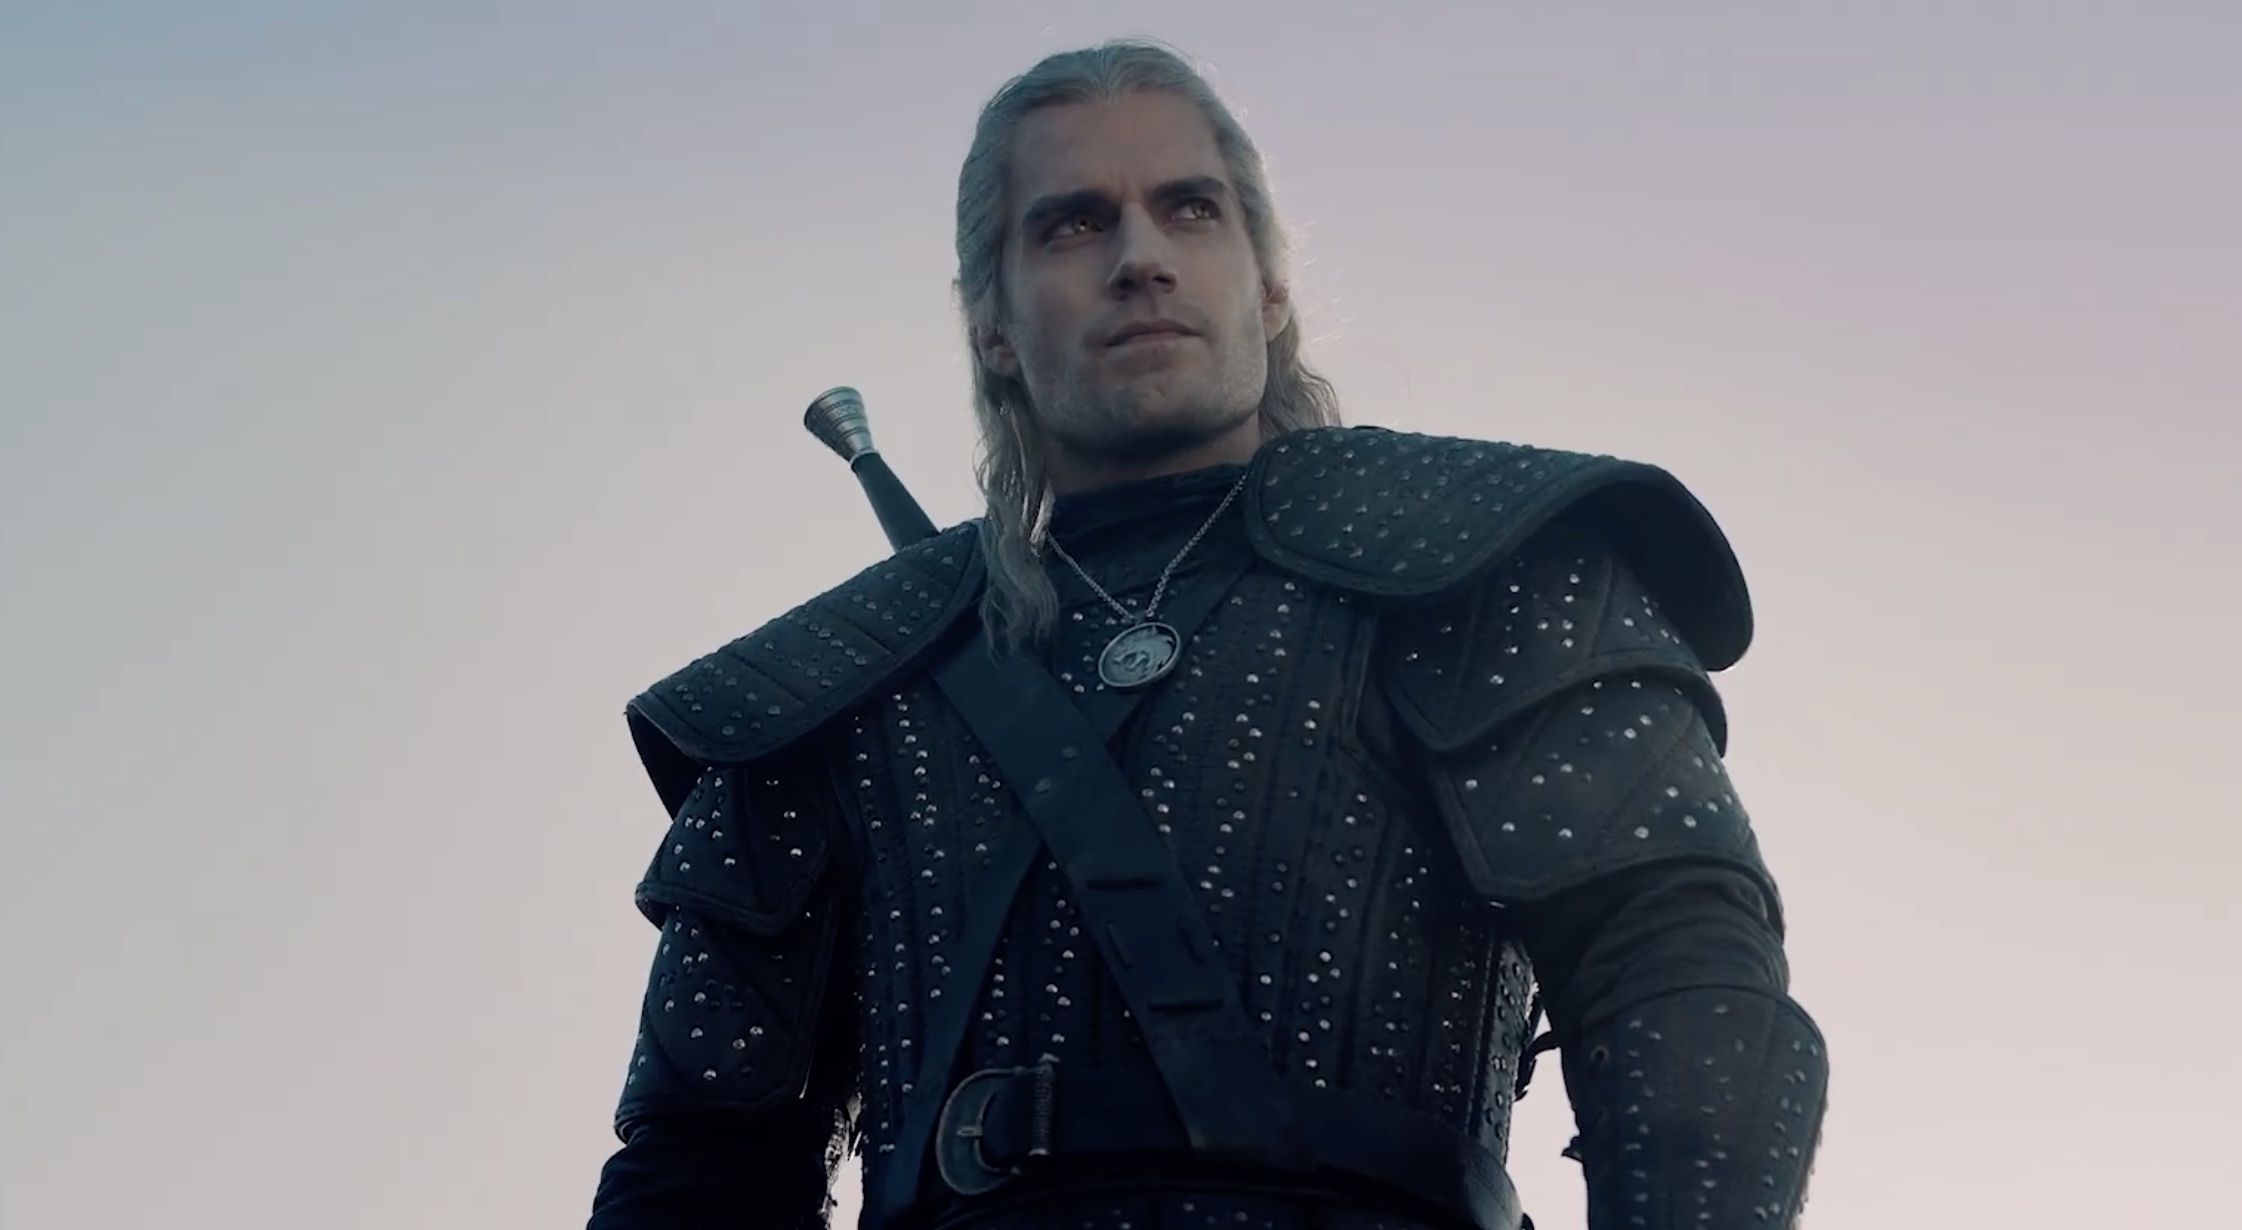 Henry Cavill stands tall and beady eyed as Geralt in Witcher season 2